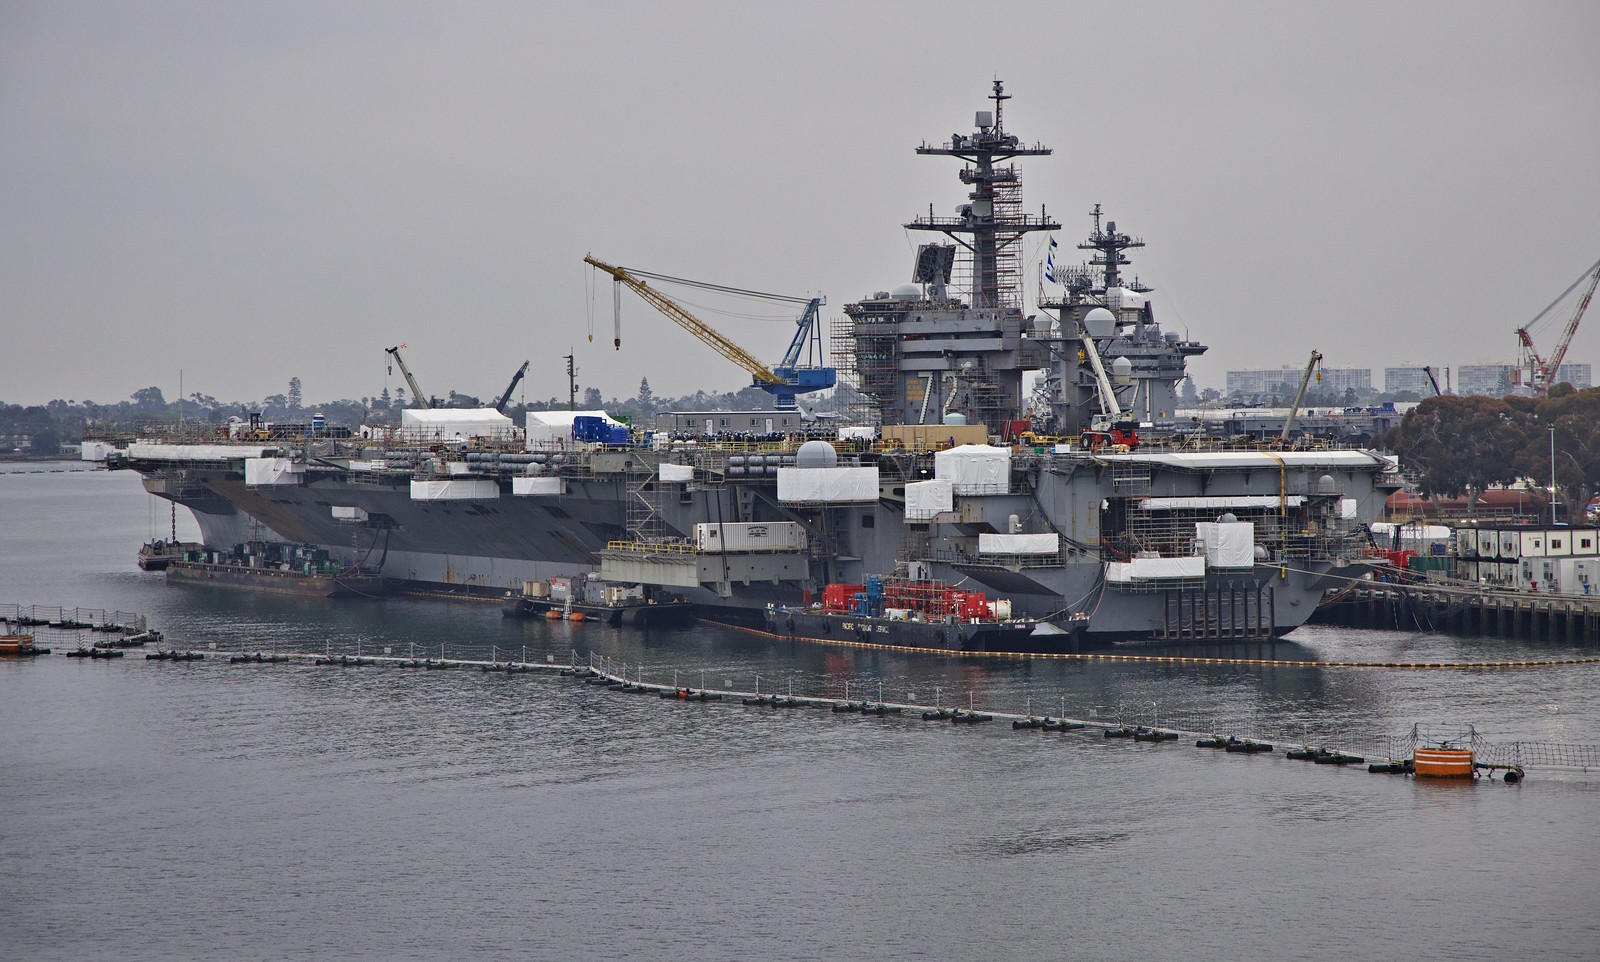 USS Abraham Lincoln aircraft carrier being refitted